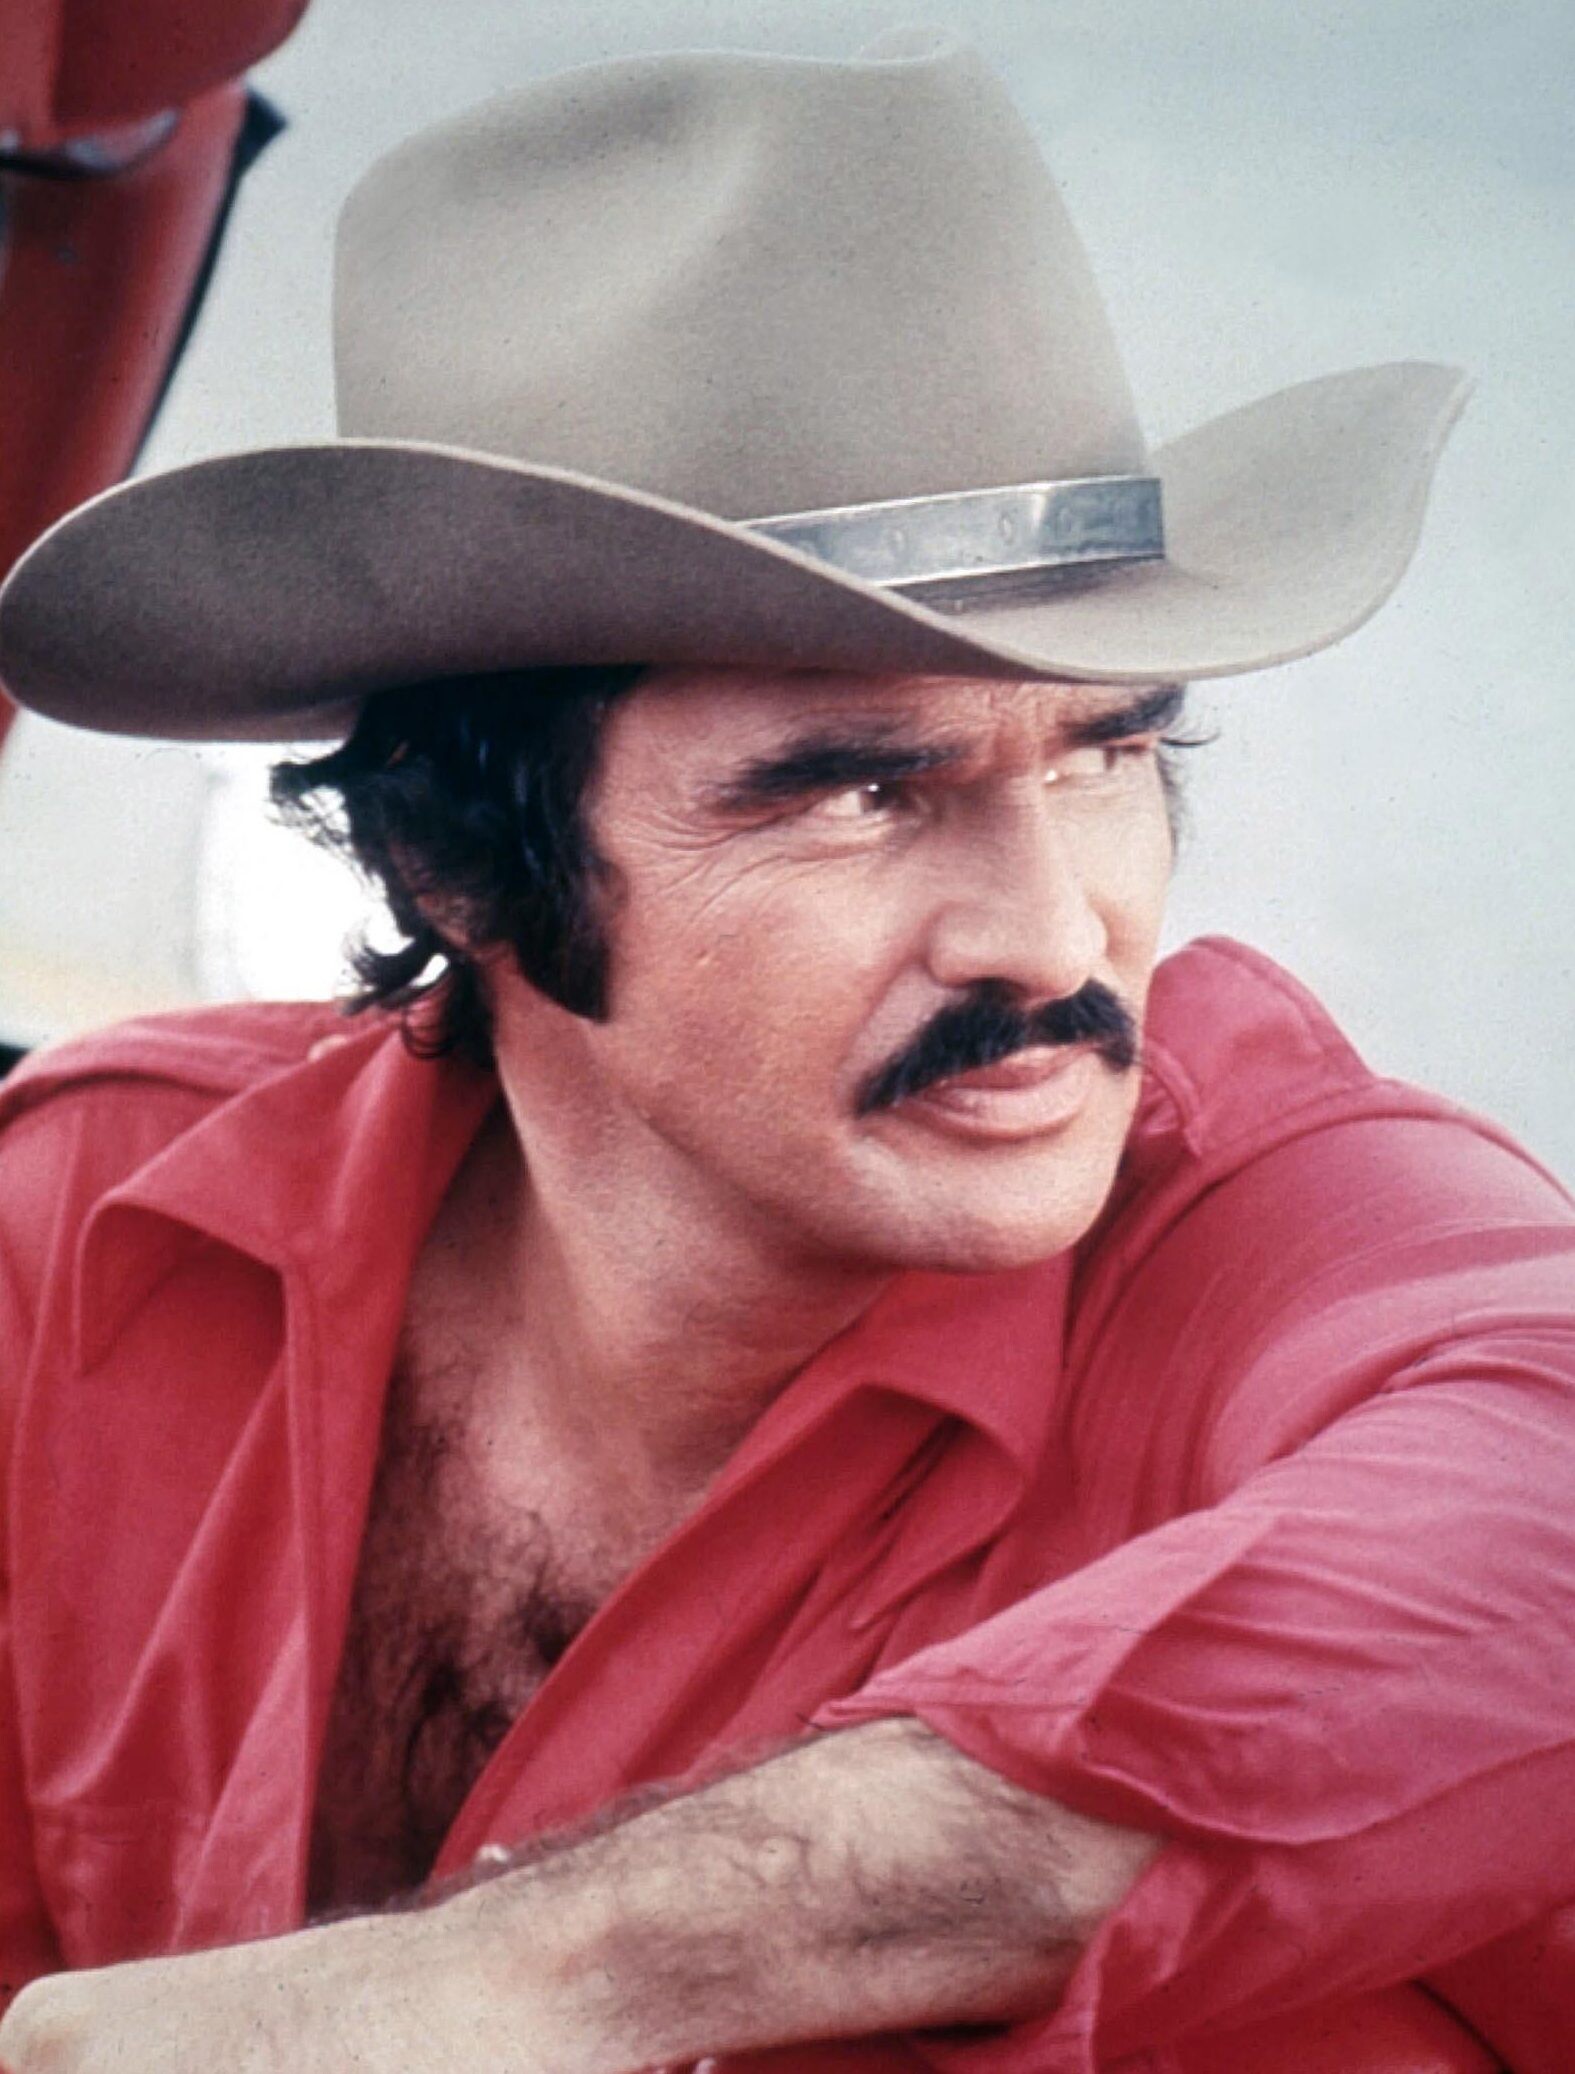 Burt Reynolds: Smokey and the Bandit, Bo “Bandit” Darville, Bootleggers, Transporting 400 cases of Coors beer. 1580x2080 HD Background.